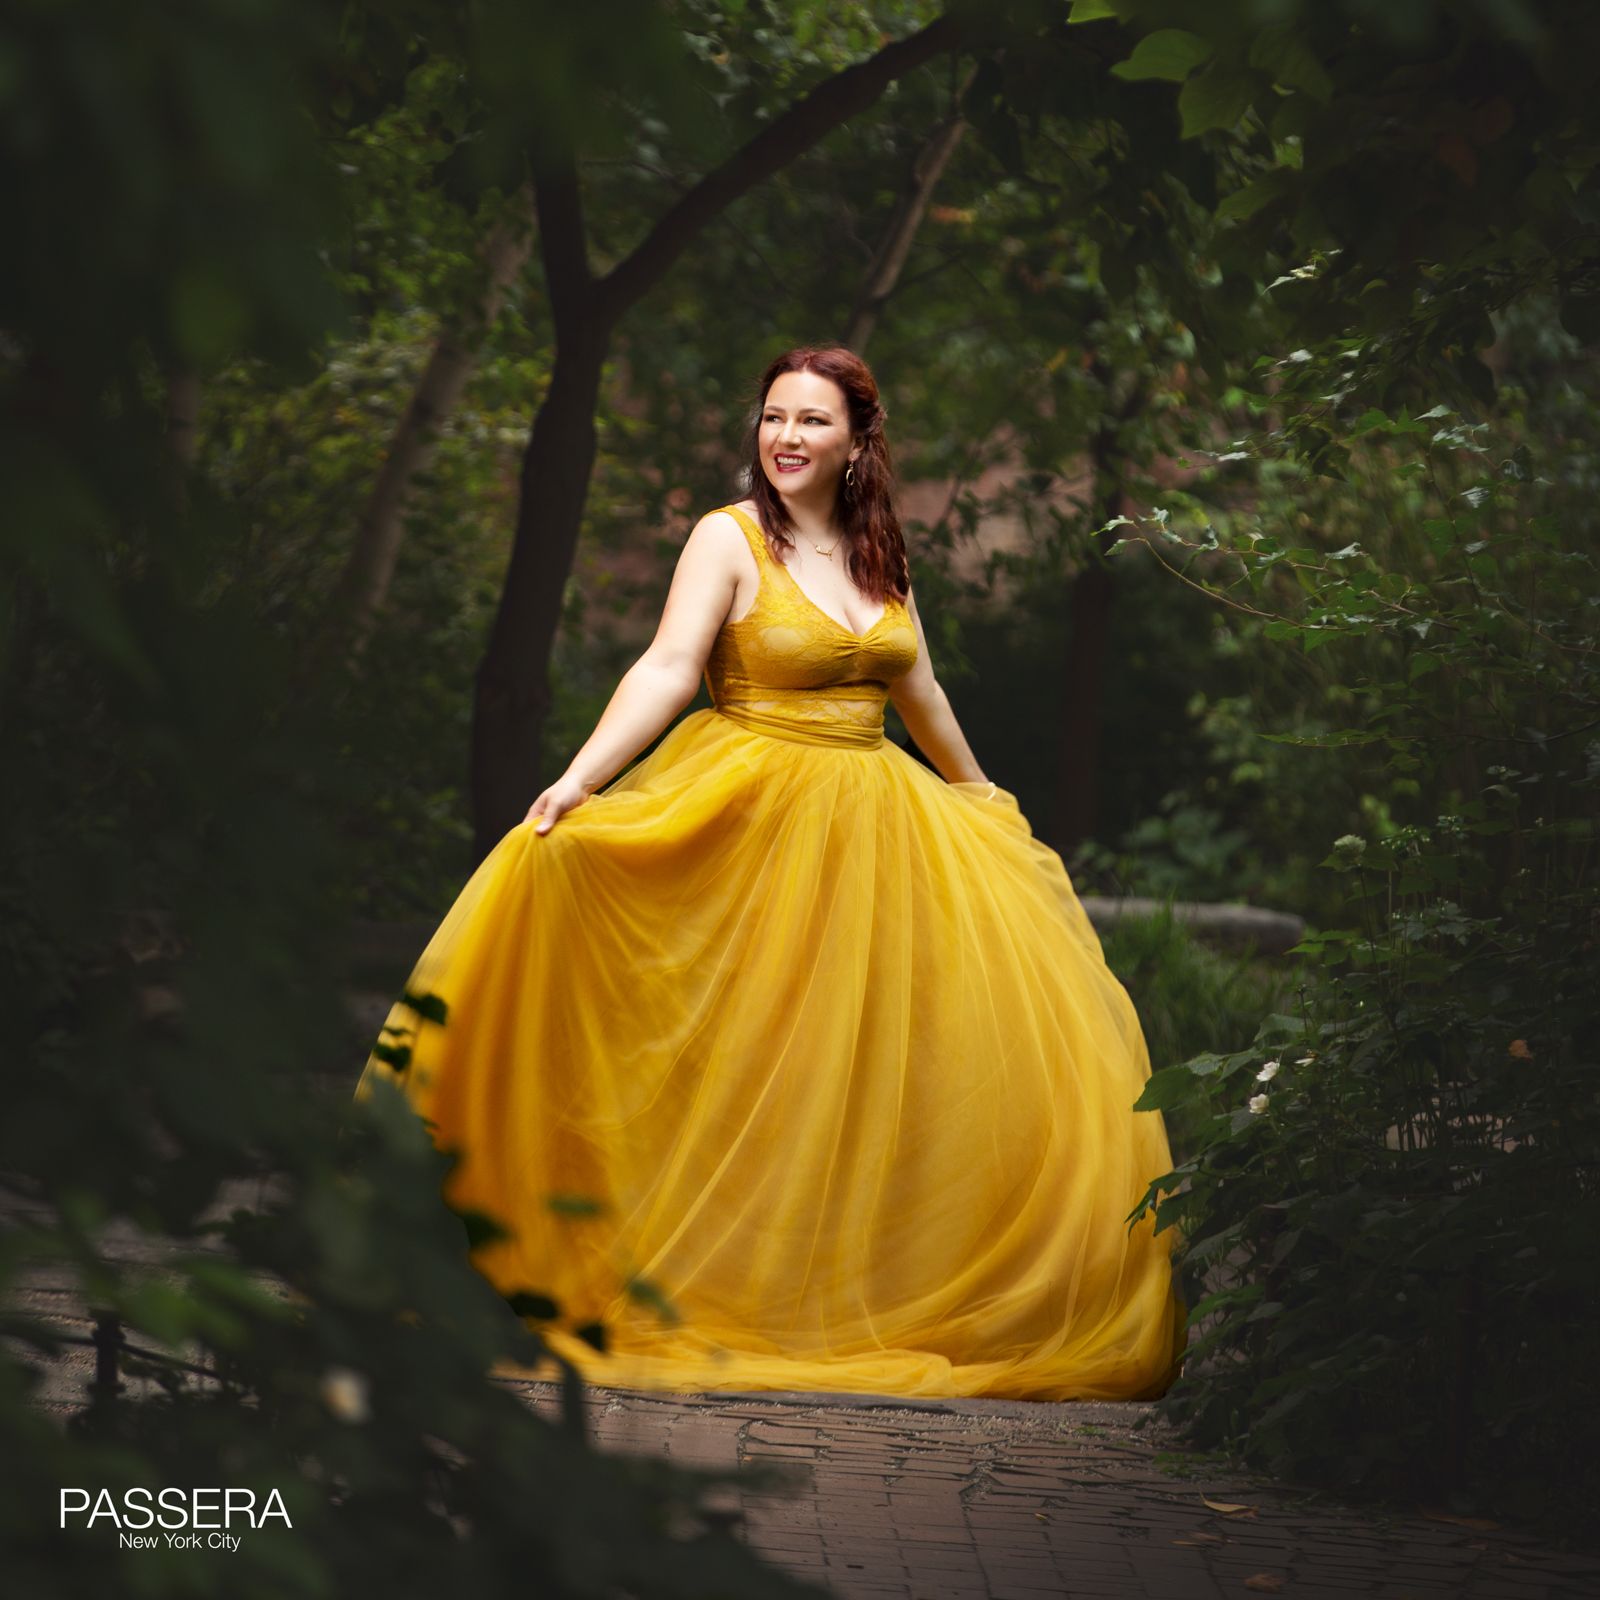 white skinned woman with dark brunette hair pinned up-- in a forest background - standing up with her hands to the side holding her beautiful yellow ball gown dress.